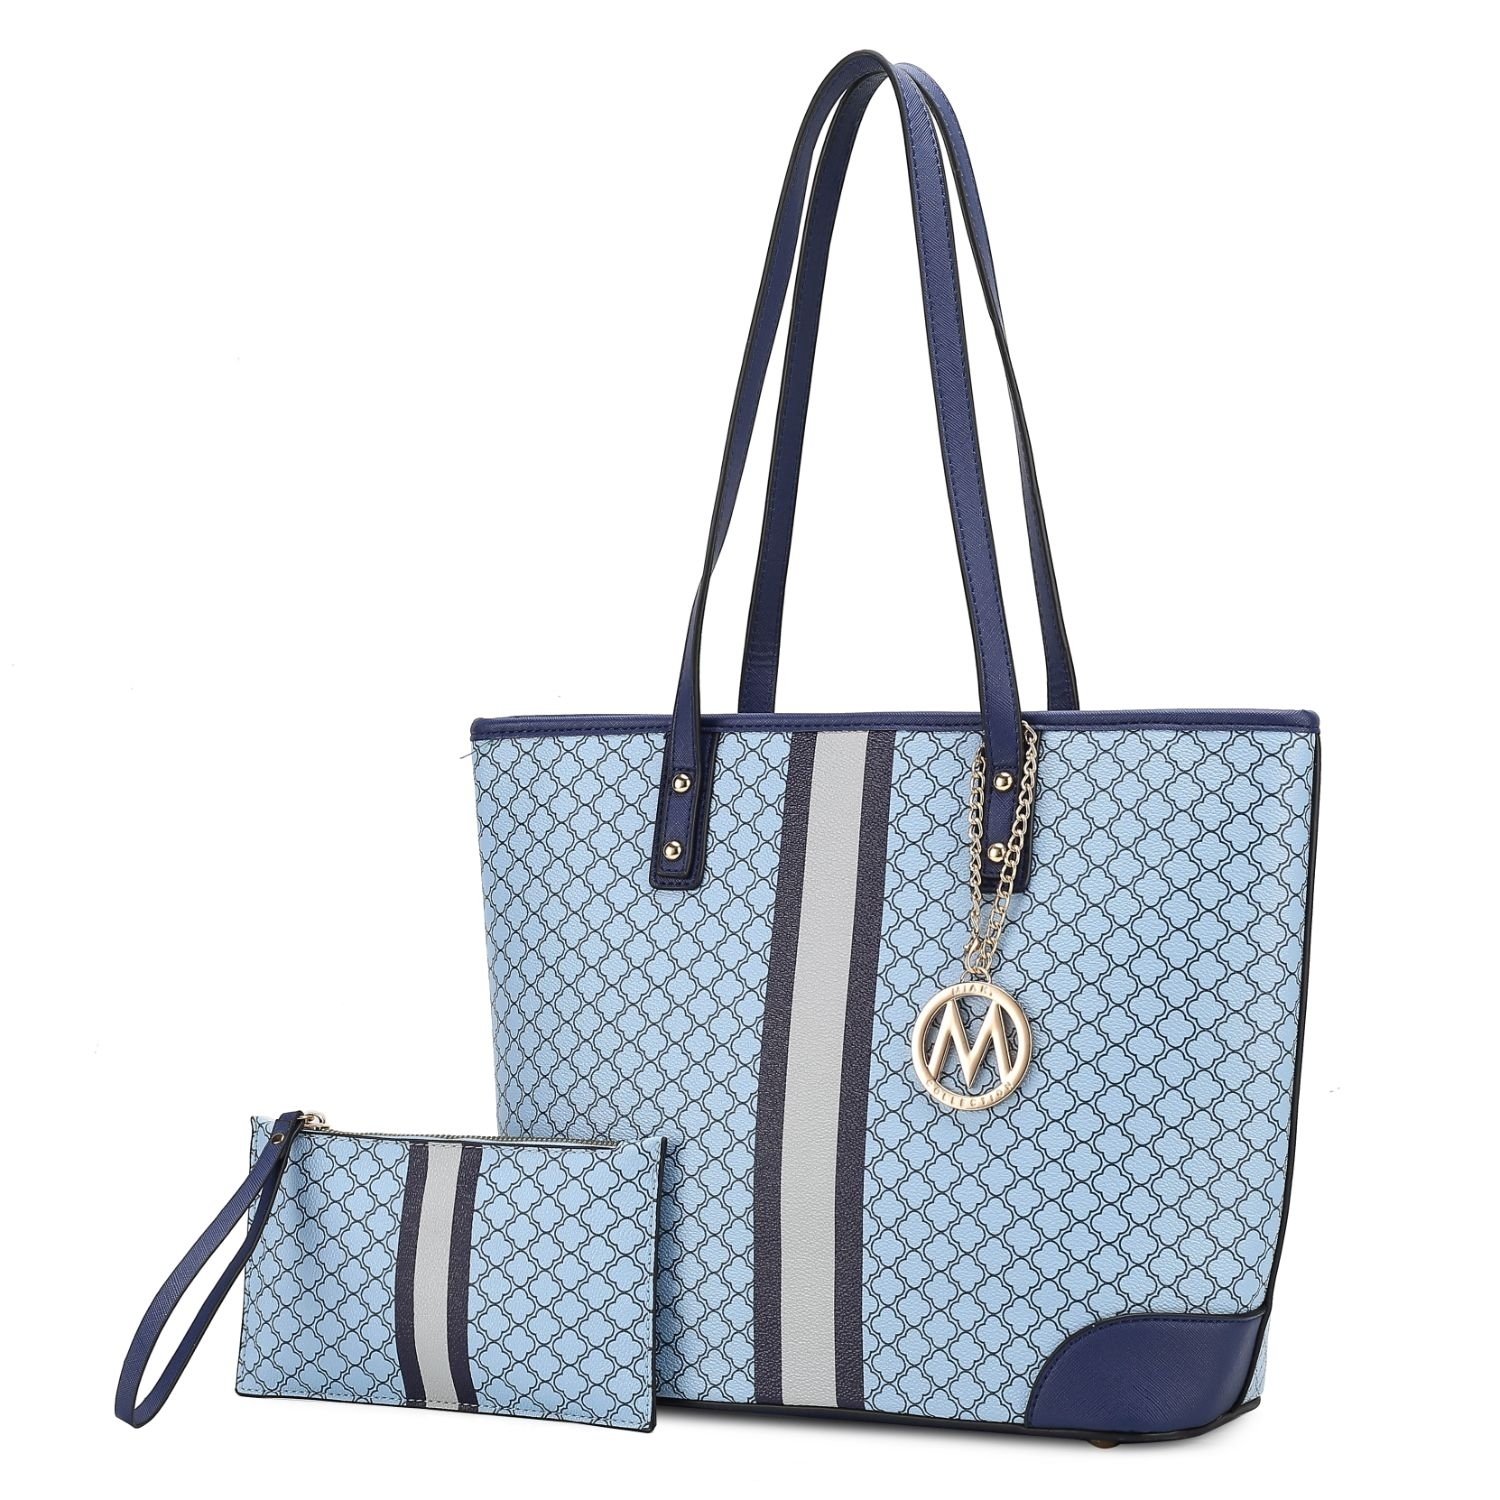 MKF Collection Arya Vegan Leather Women's Tote Bag With Wristlet Pouch- 2 Pieces By Mia K - Light Blue-navy